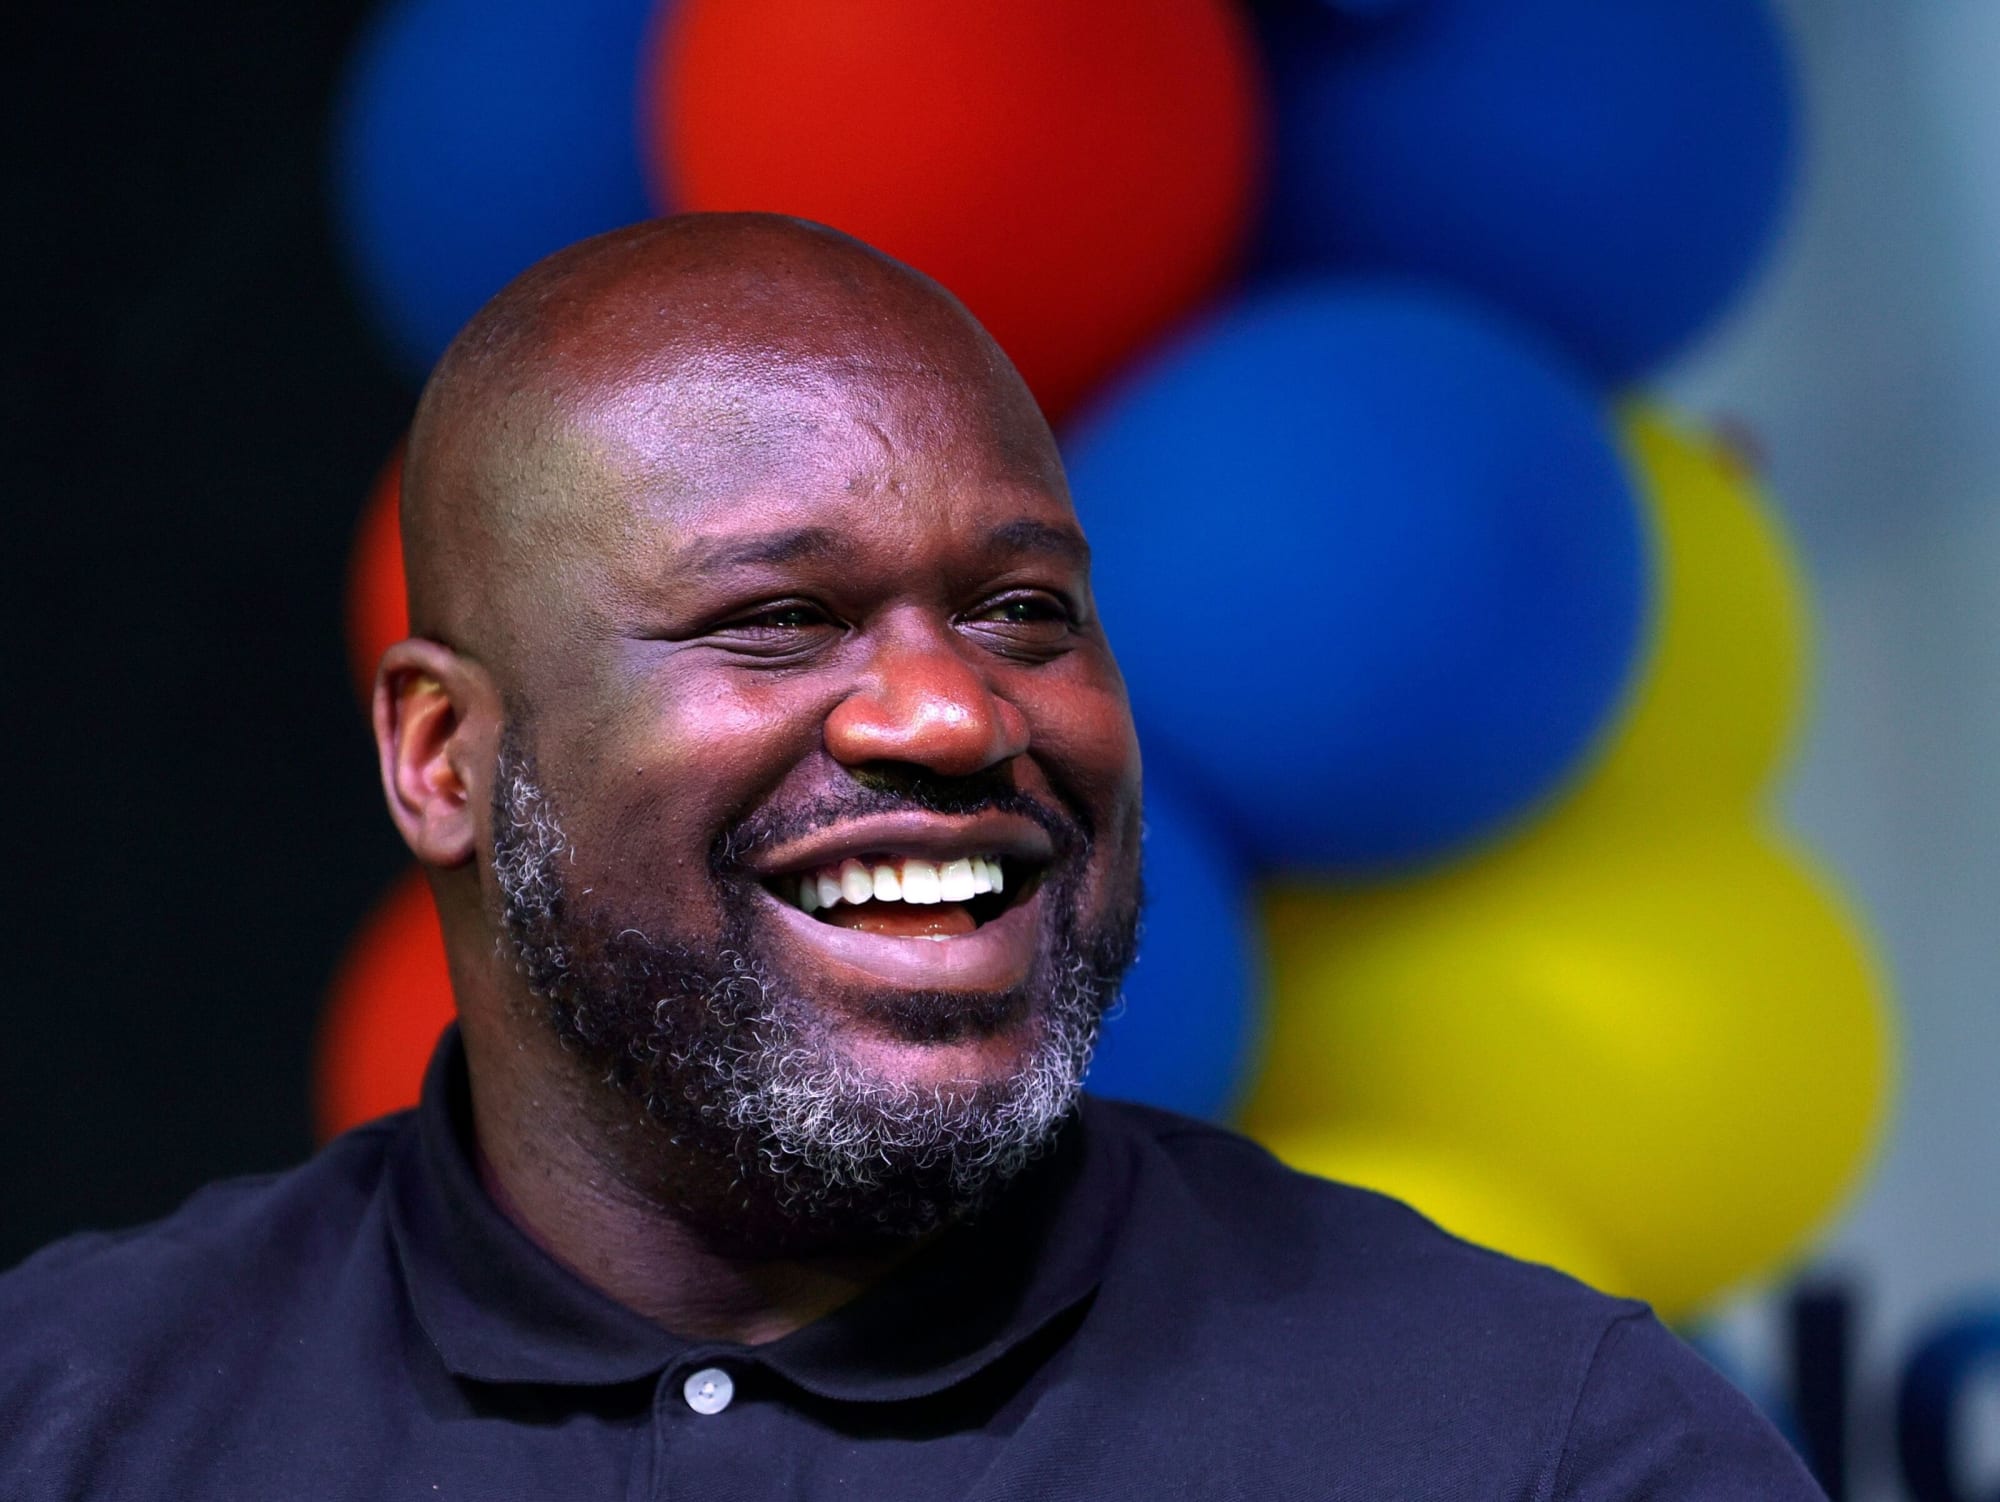 Watch Cowboys fan Shaquille O'Neal pay up after losing bet